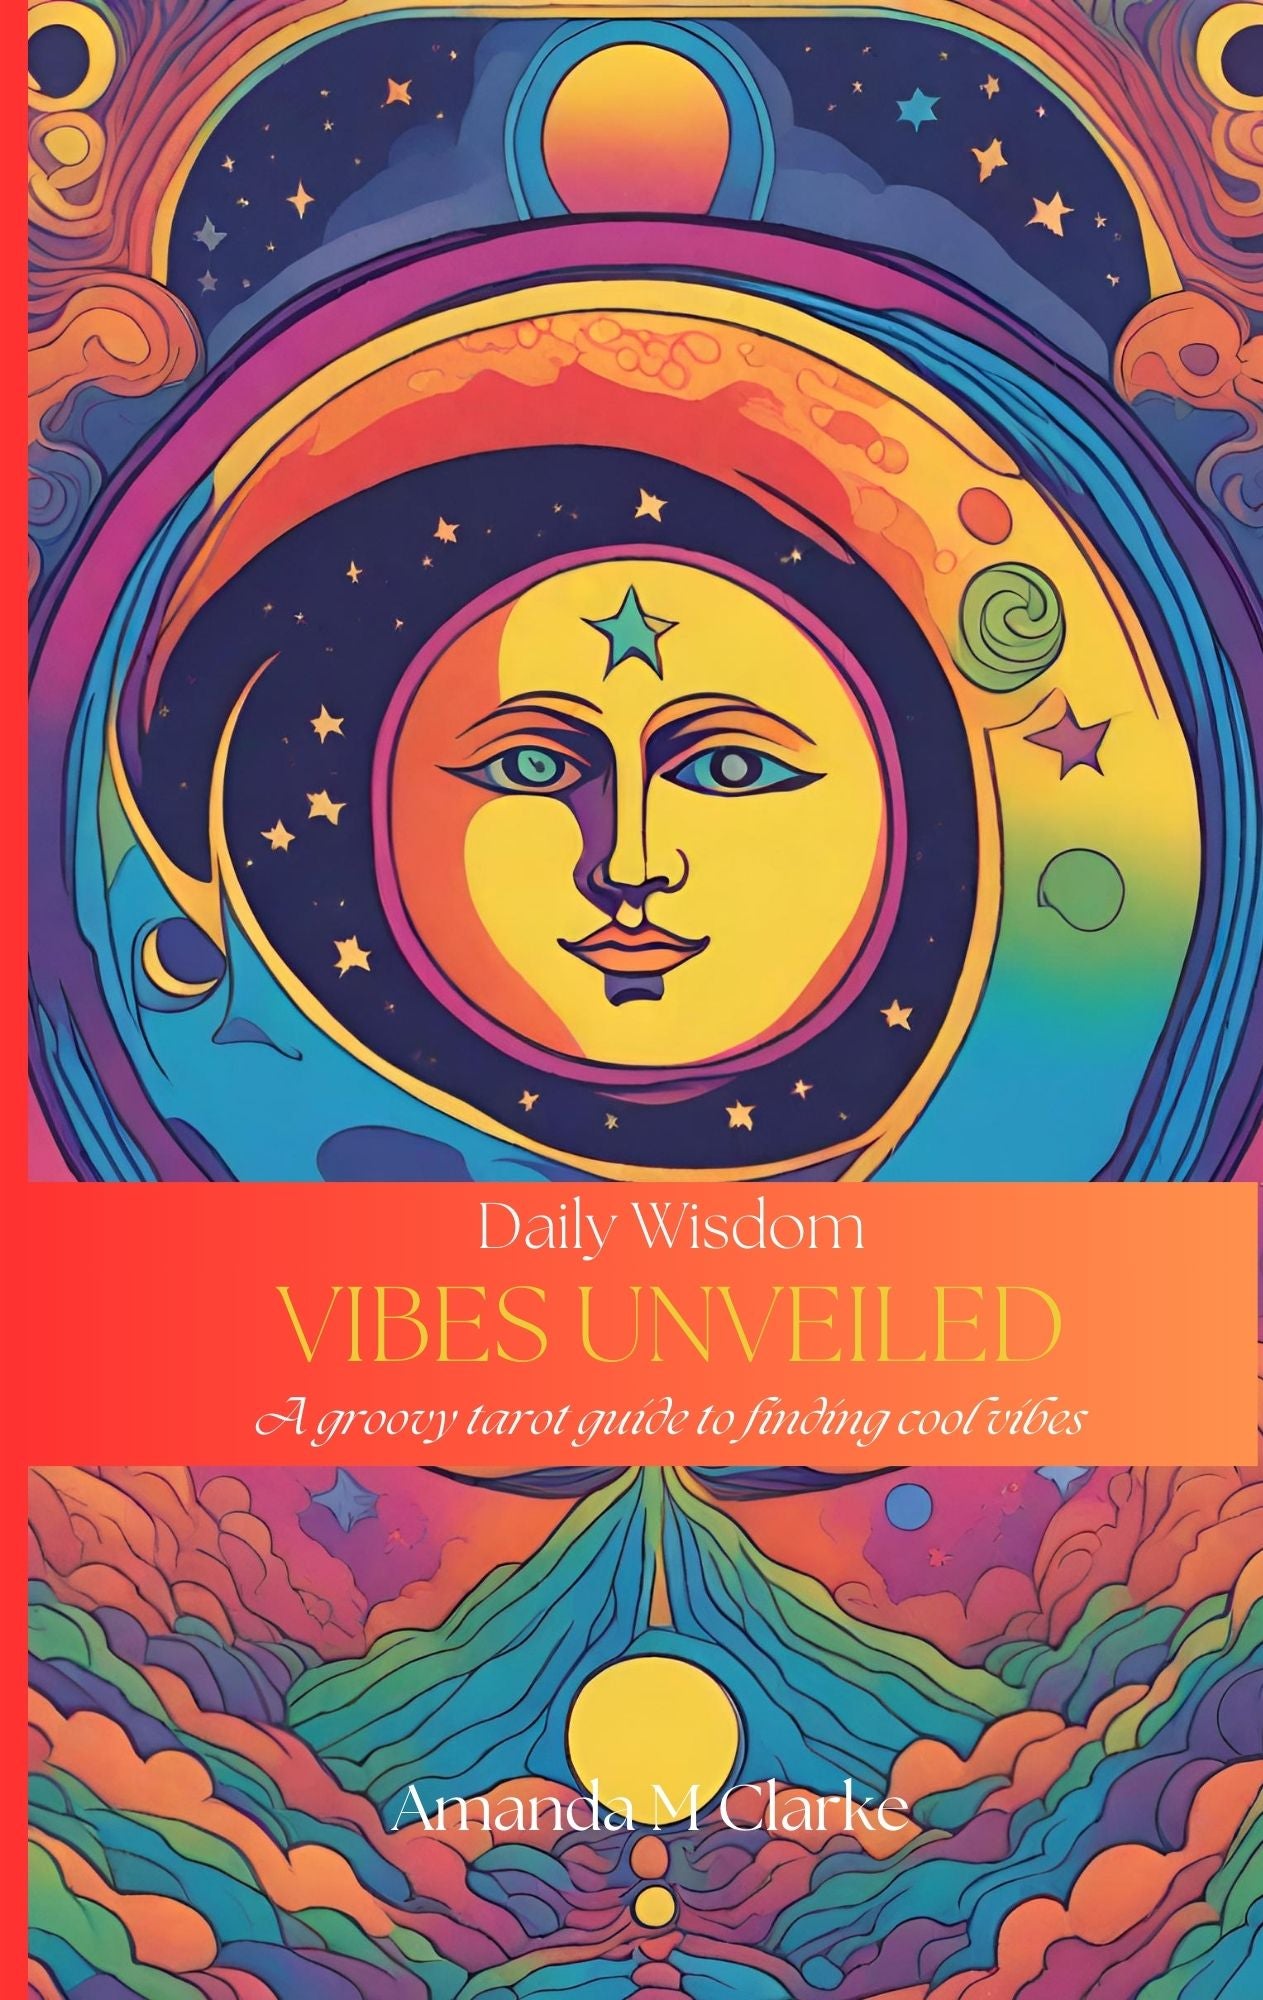 Vibes unveiled. a grovy tarot reading guide to finding cool vibes